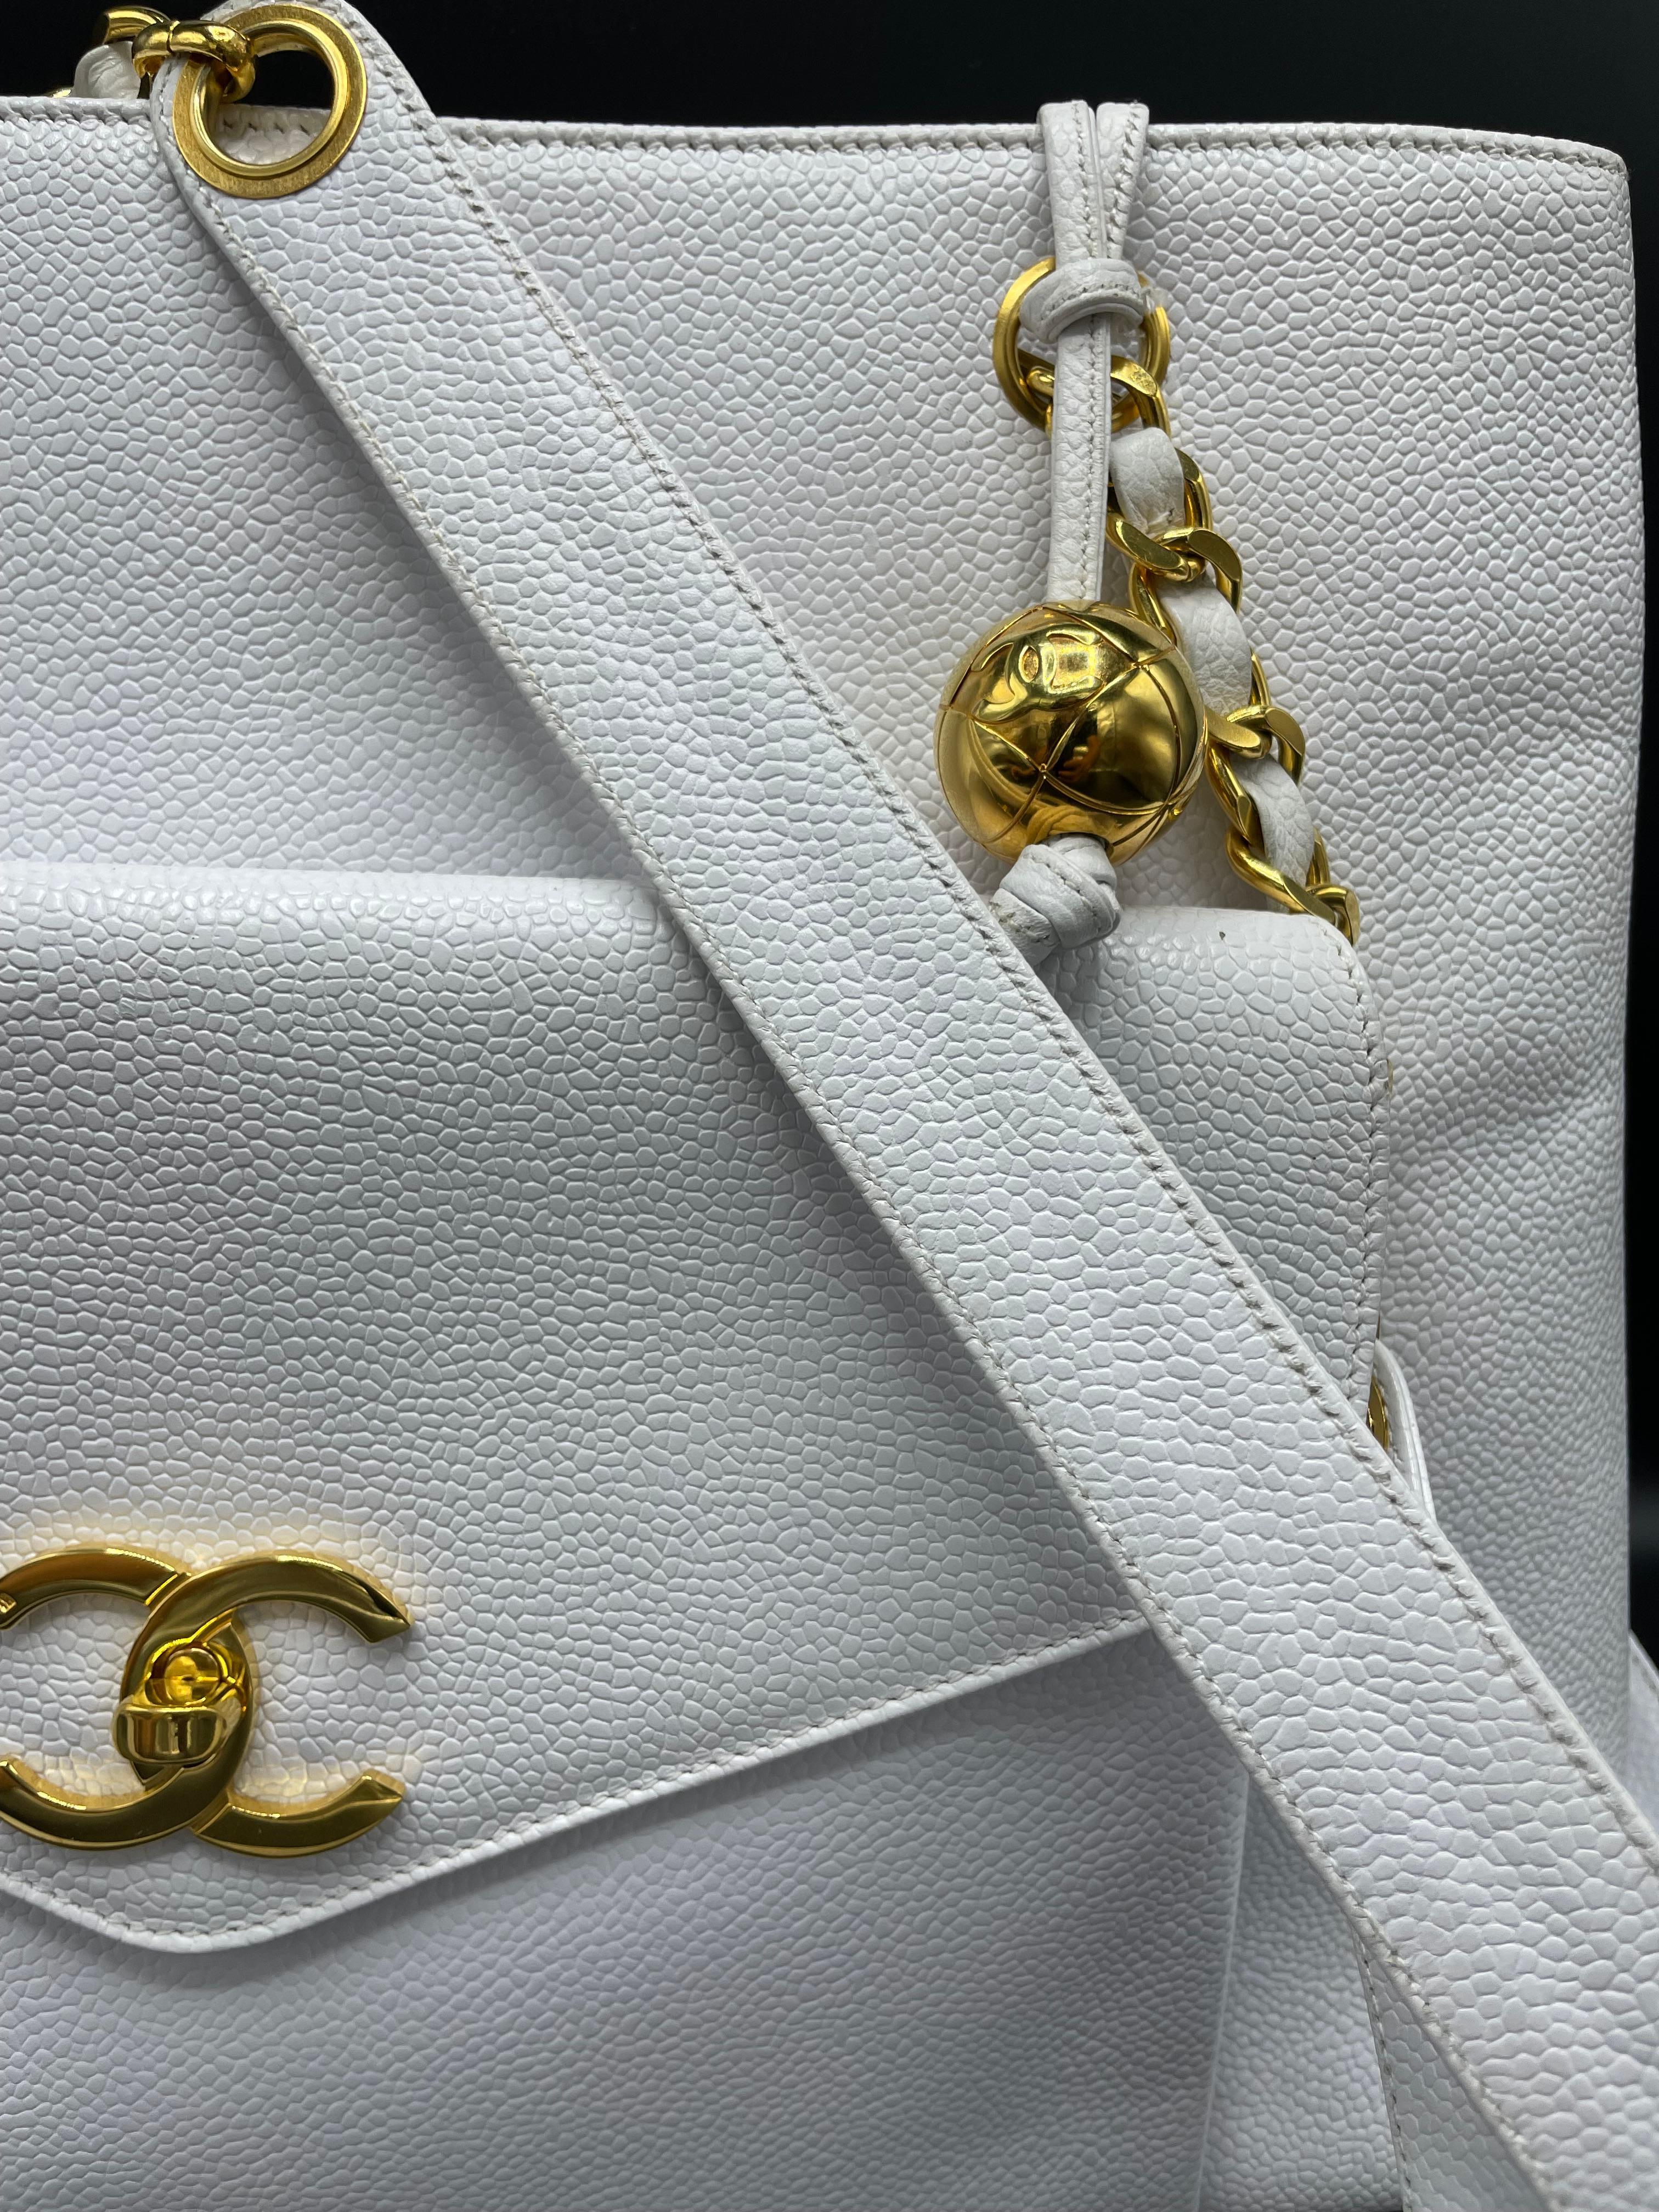 Women's or Men's Chanel White Caviar Leather Front Pocket Tote Bag For Sale